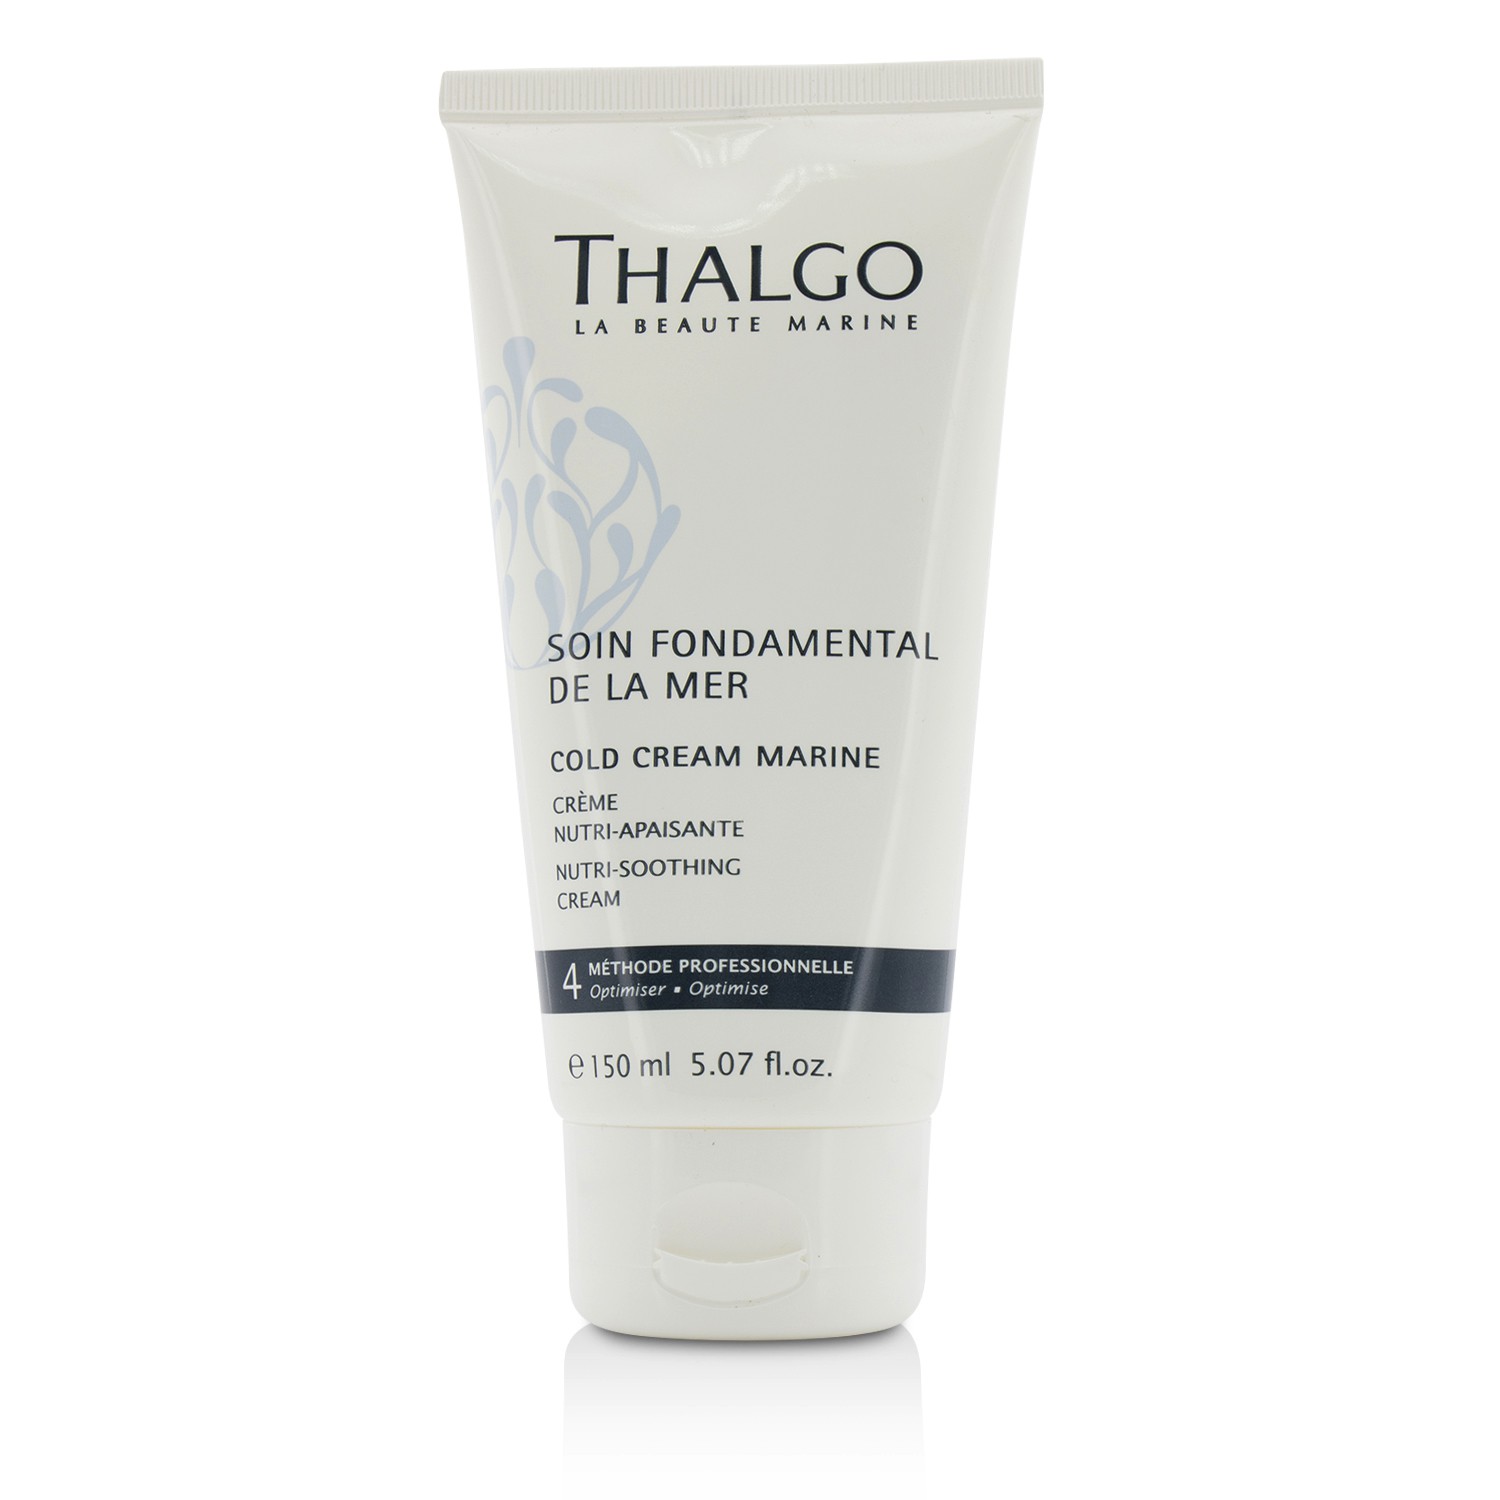 Cold Cream Marine Nutri-Soothing Cream - For Dry Sensitive Skin (Salon Size) Thalgo Image